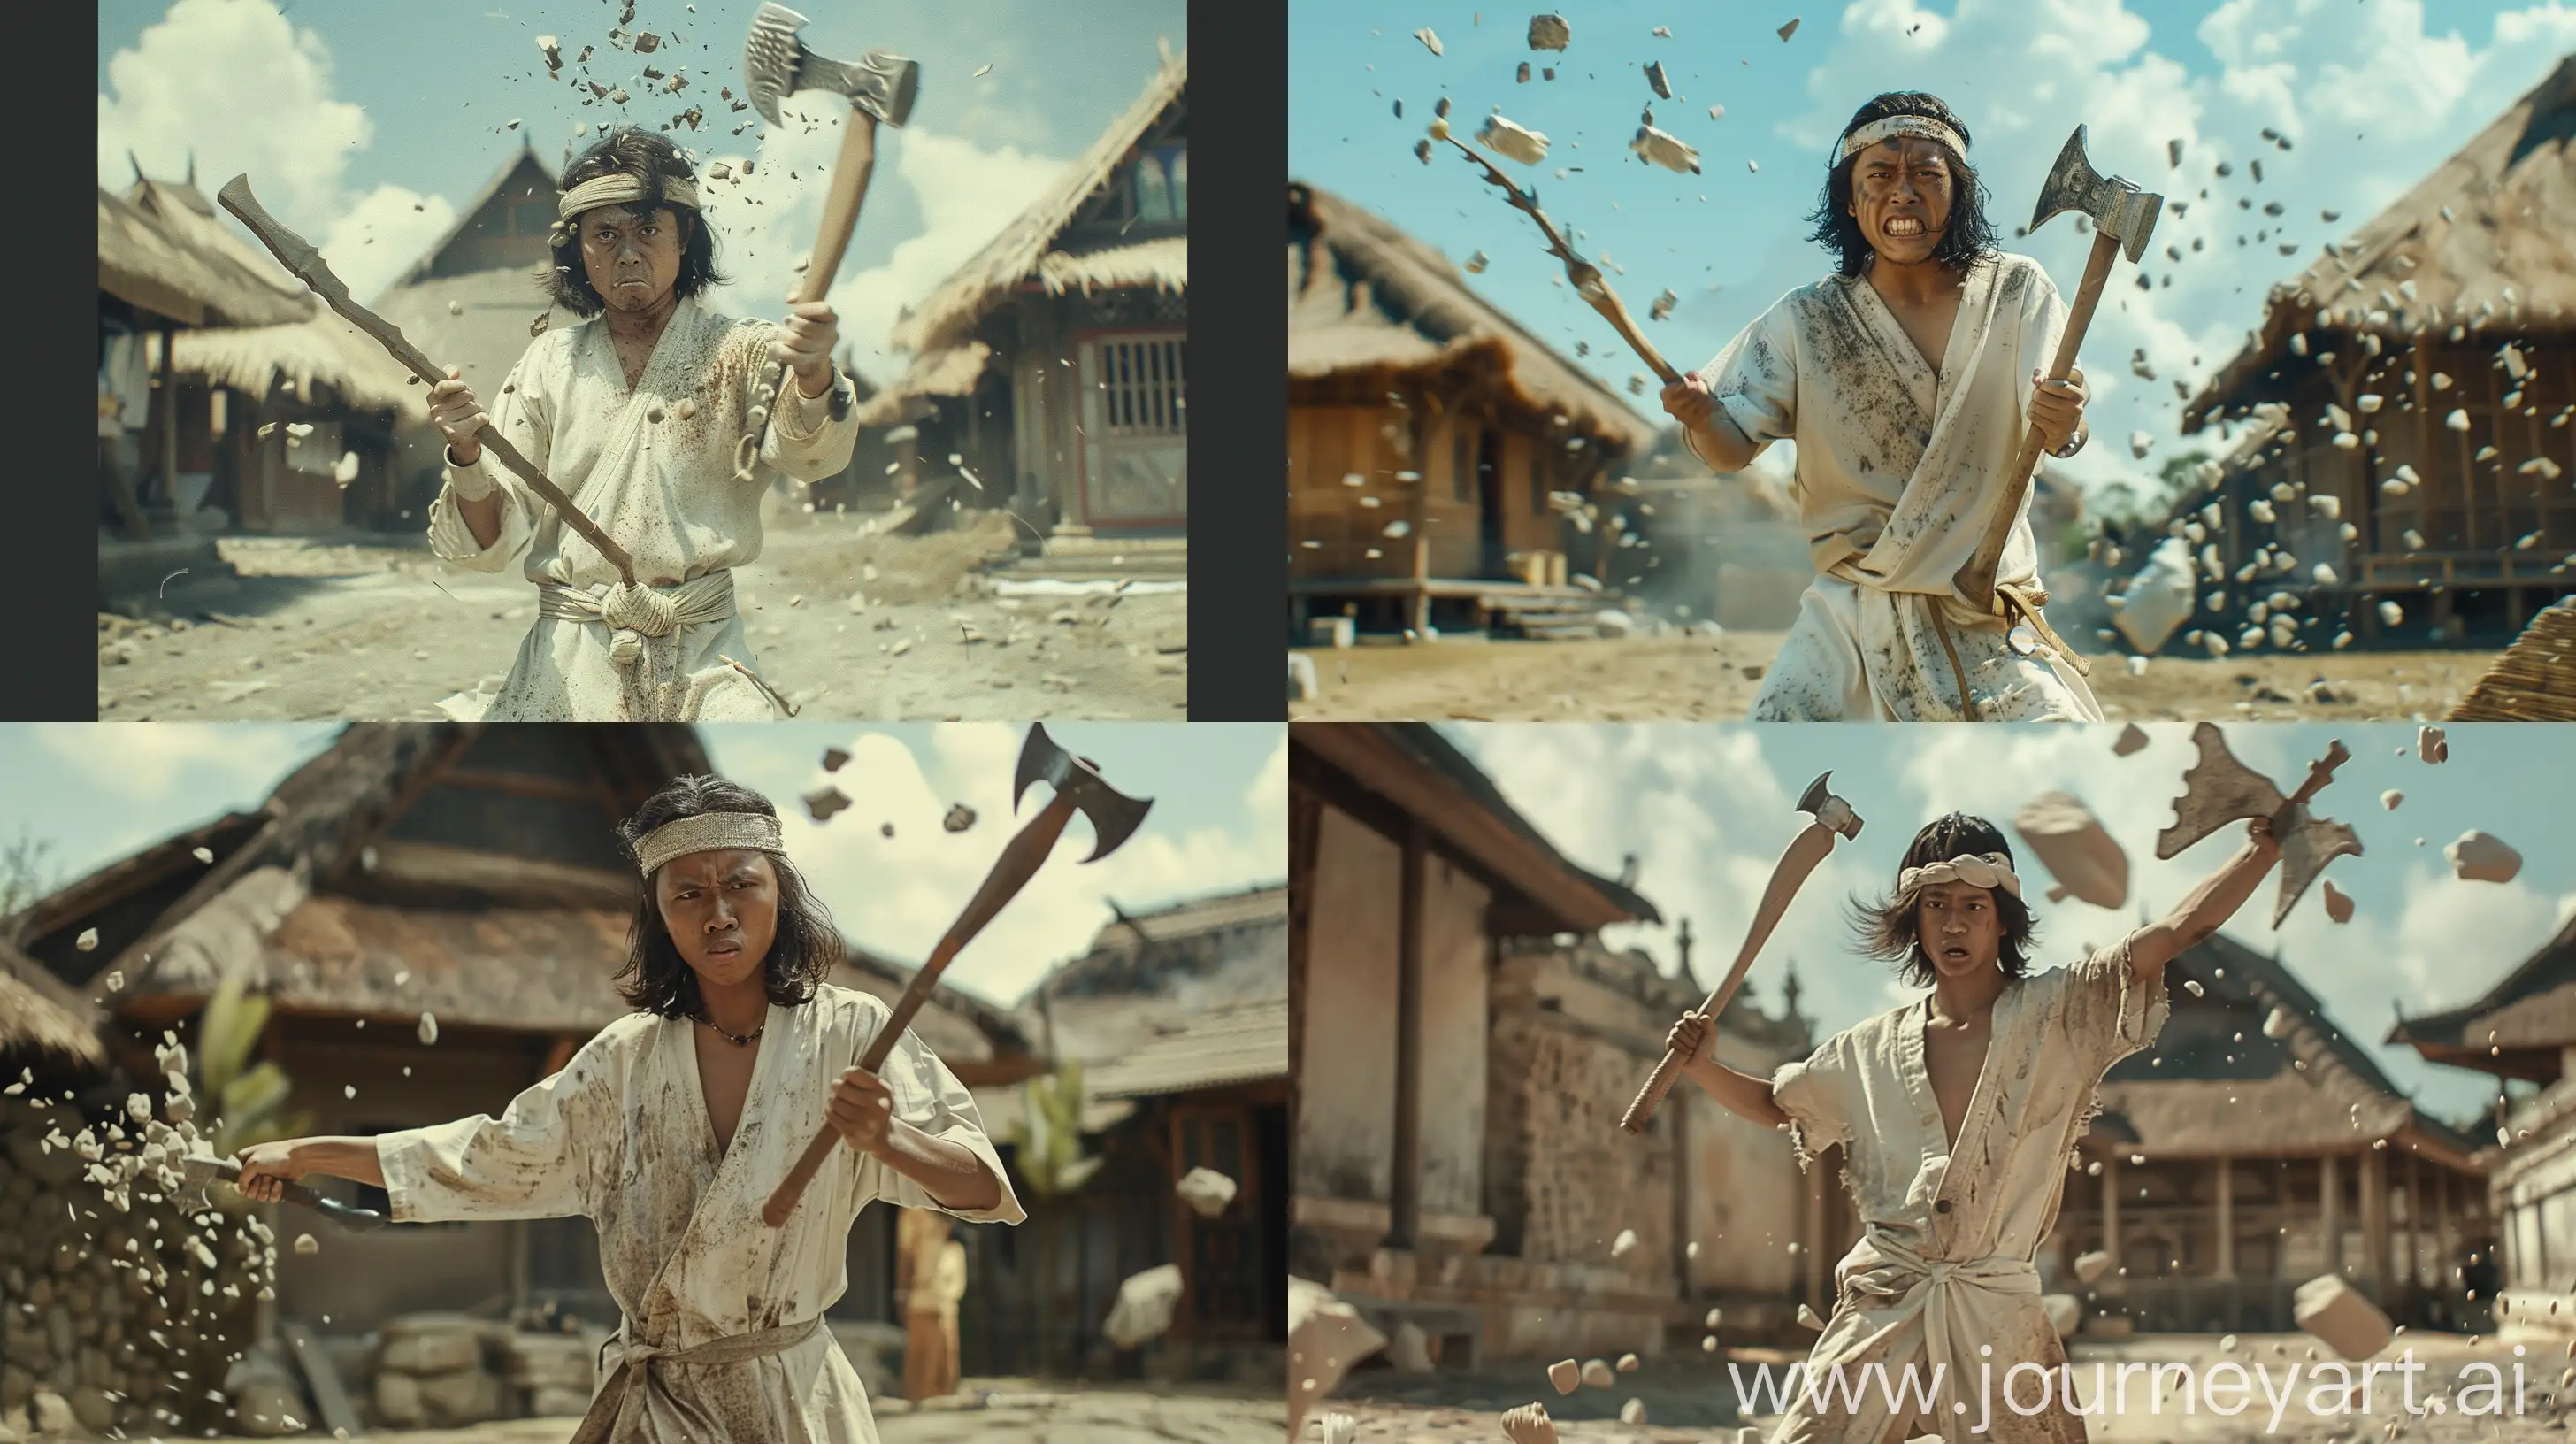 Humorous-Indonesian-Man-Throws-DoubleBladed-Ax-in-Majapahit-Village